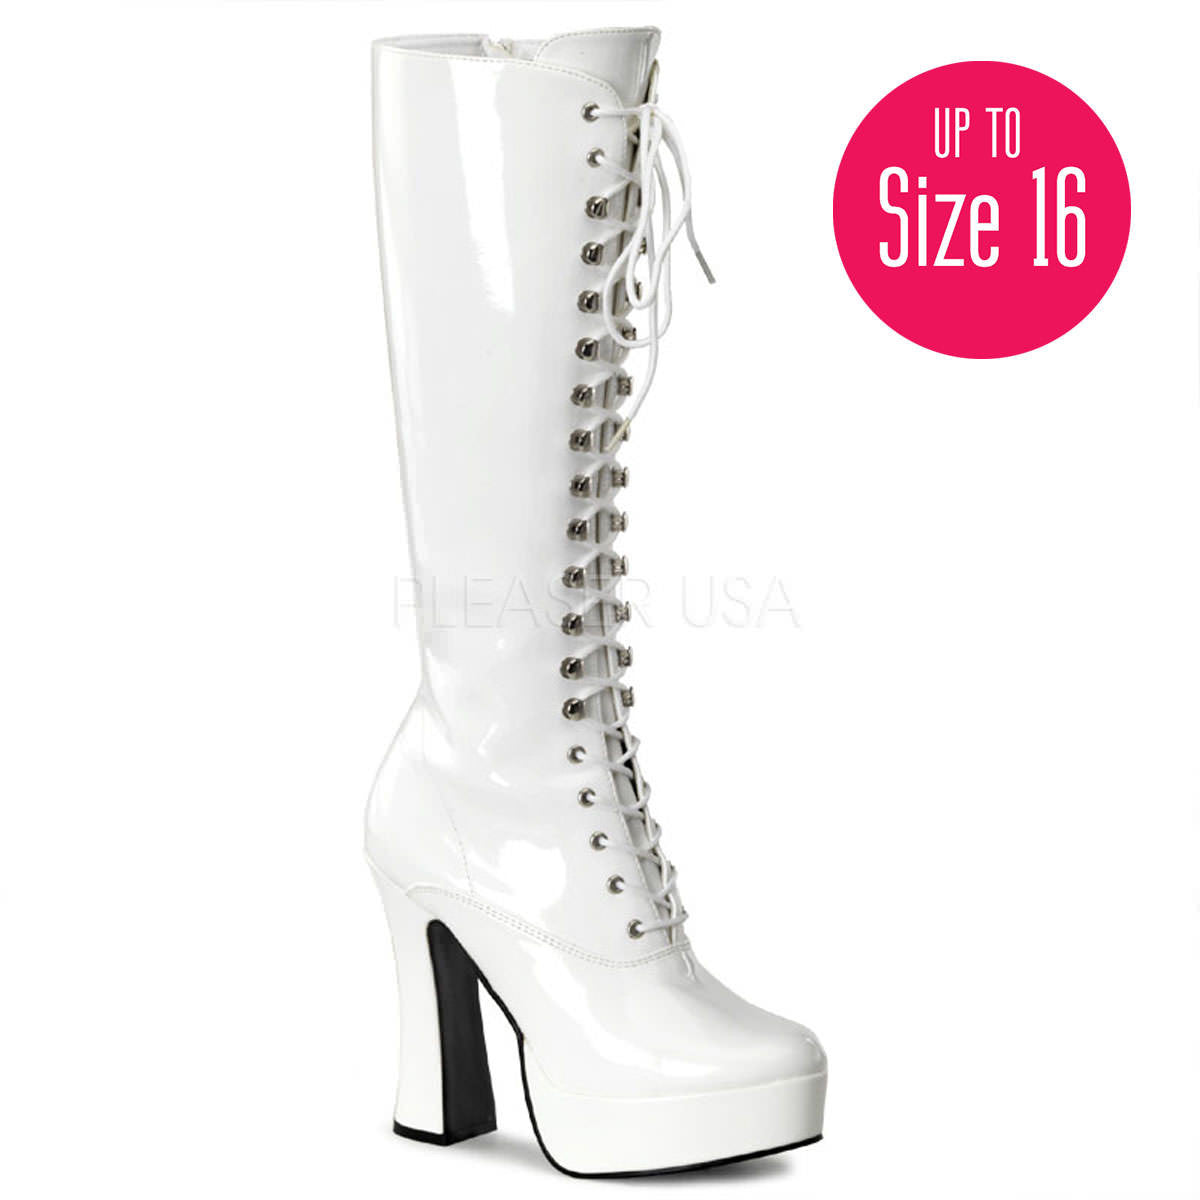 PLEASER ELECTRA-2020 White Pat Knee High Boots - Shoecup.com